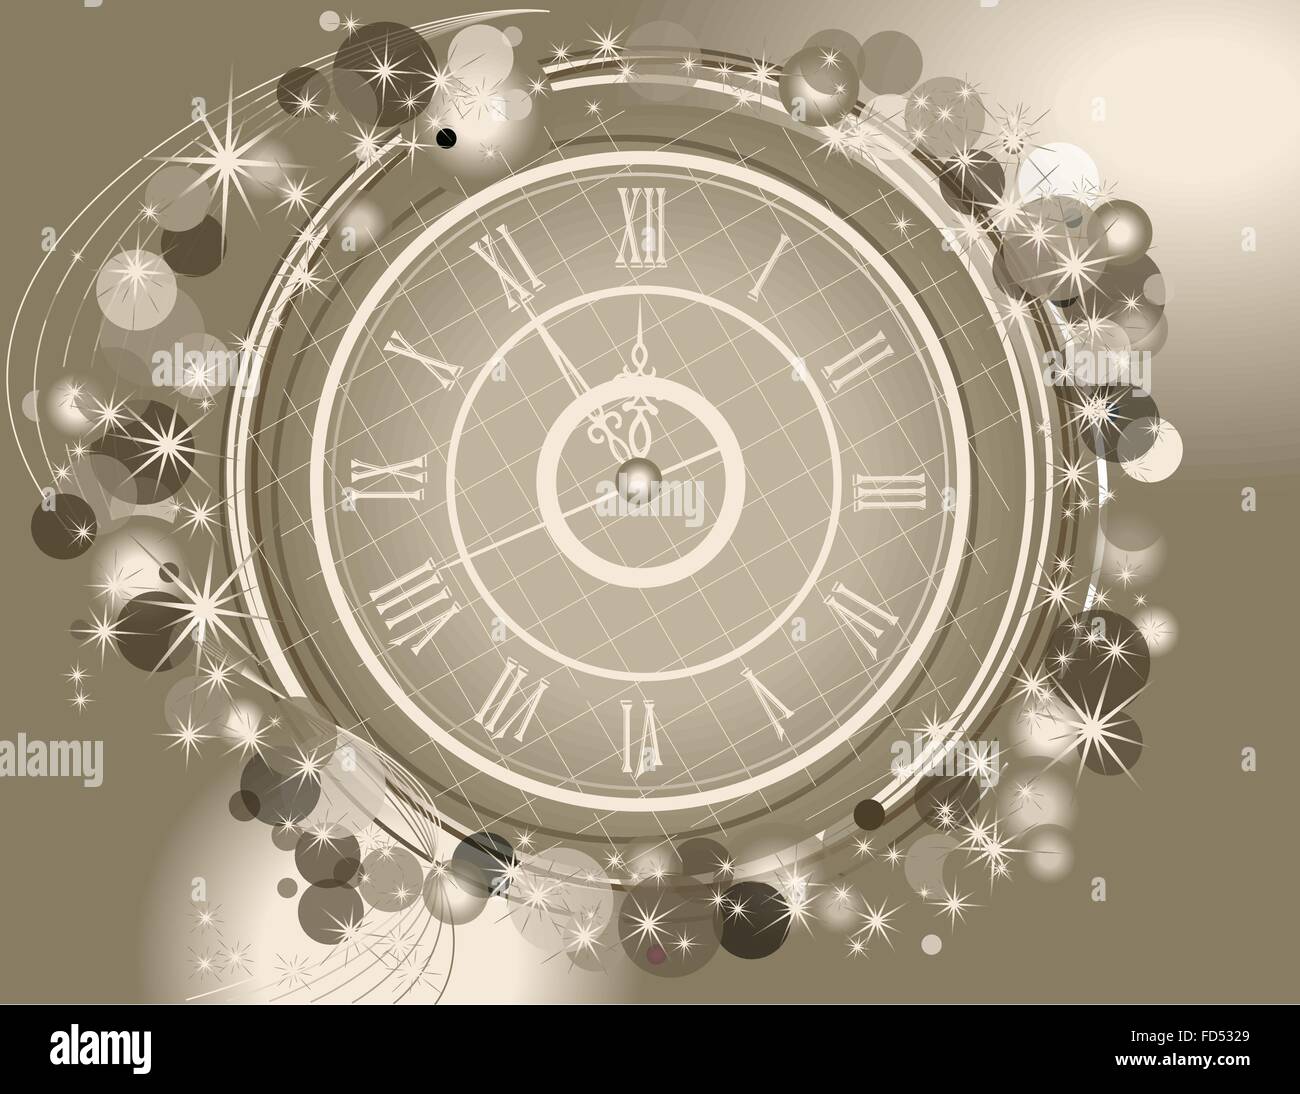 Happy New Year  background  with clock Stock Vector